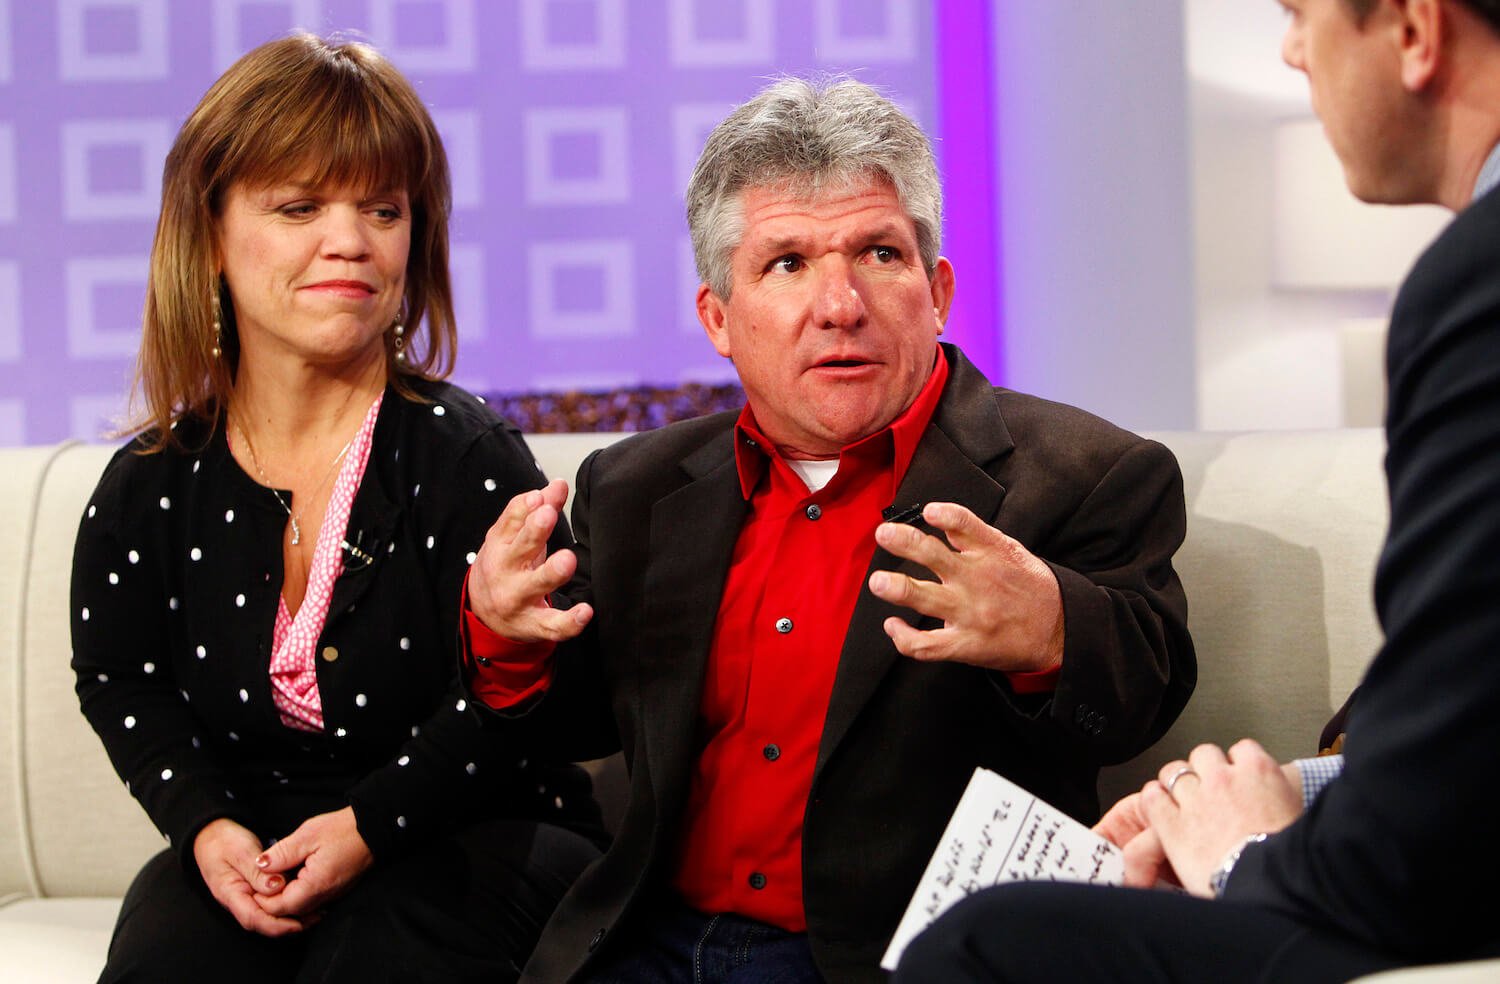 Matt Roloff and Amy Roloff from 'Little People, Big World' sitting next to each other during an interview